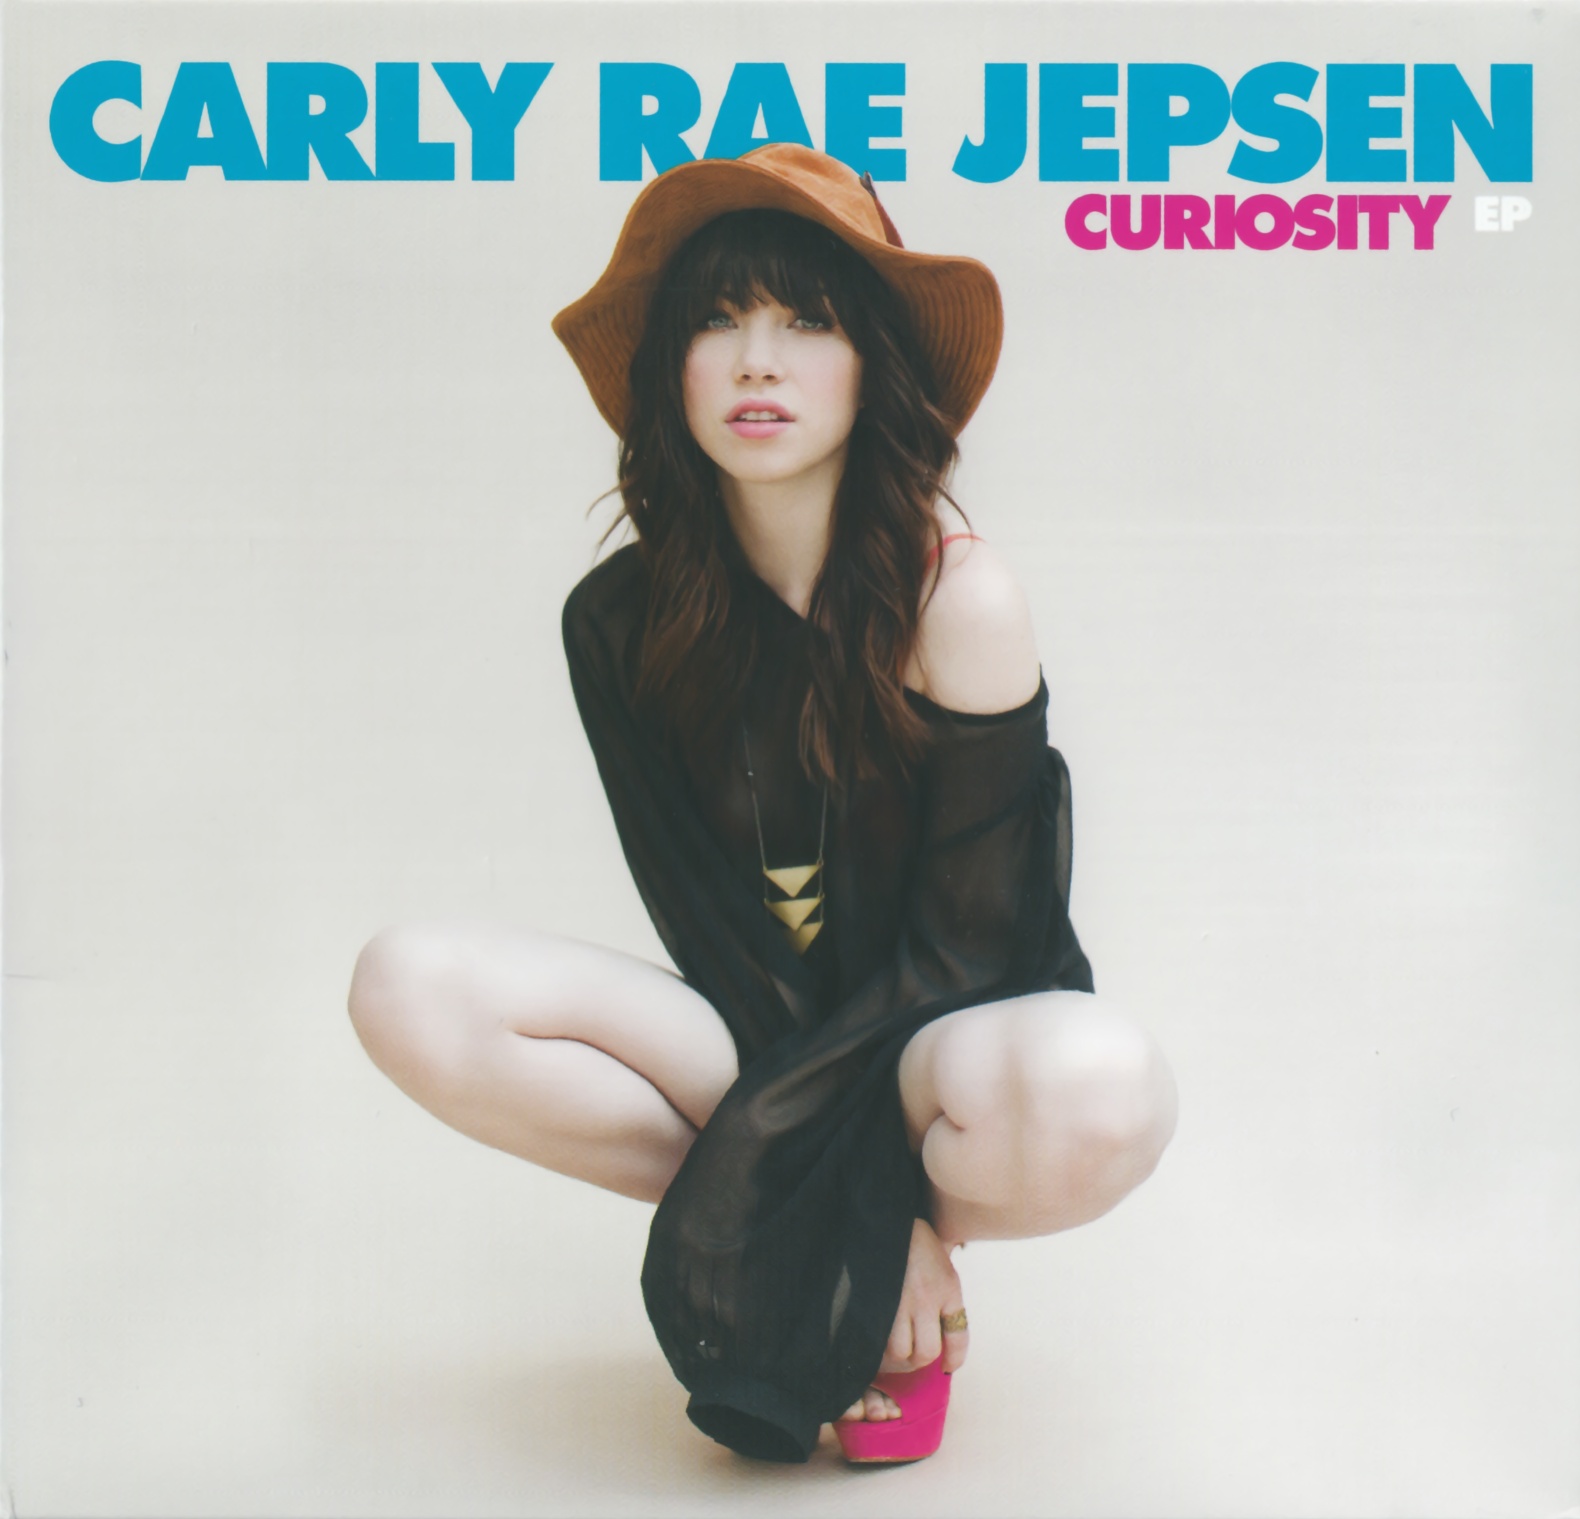 Carly Rae Jepsen Call Me Maybe Profile Image